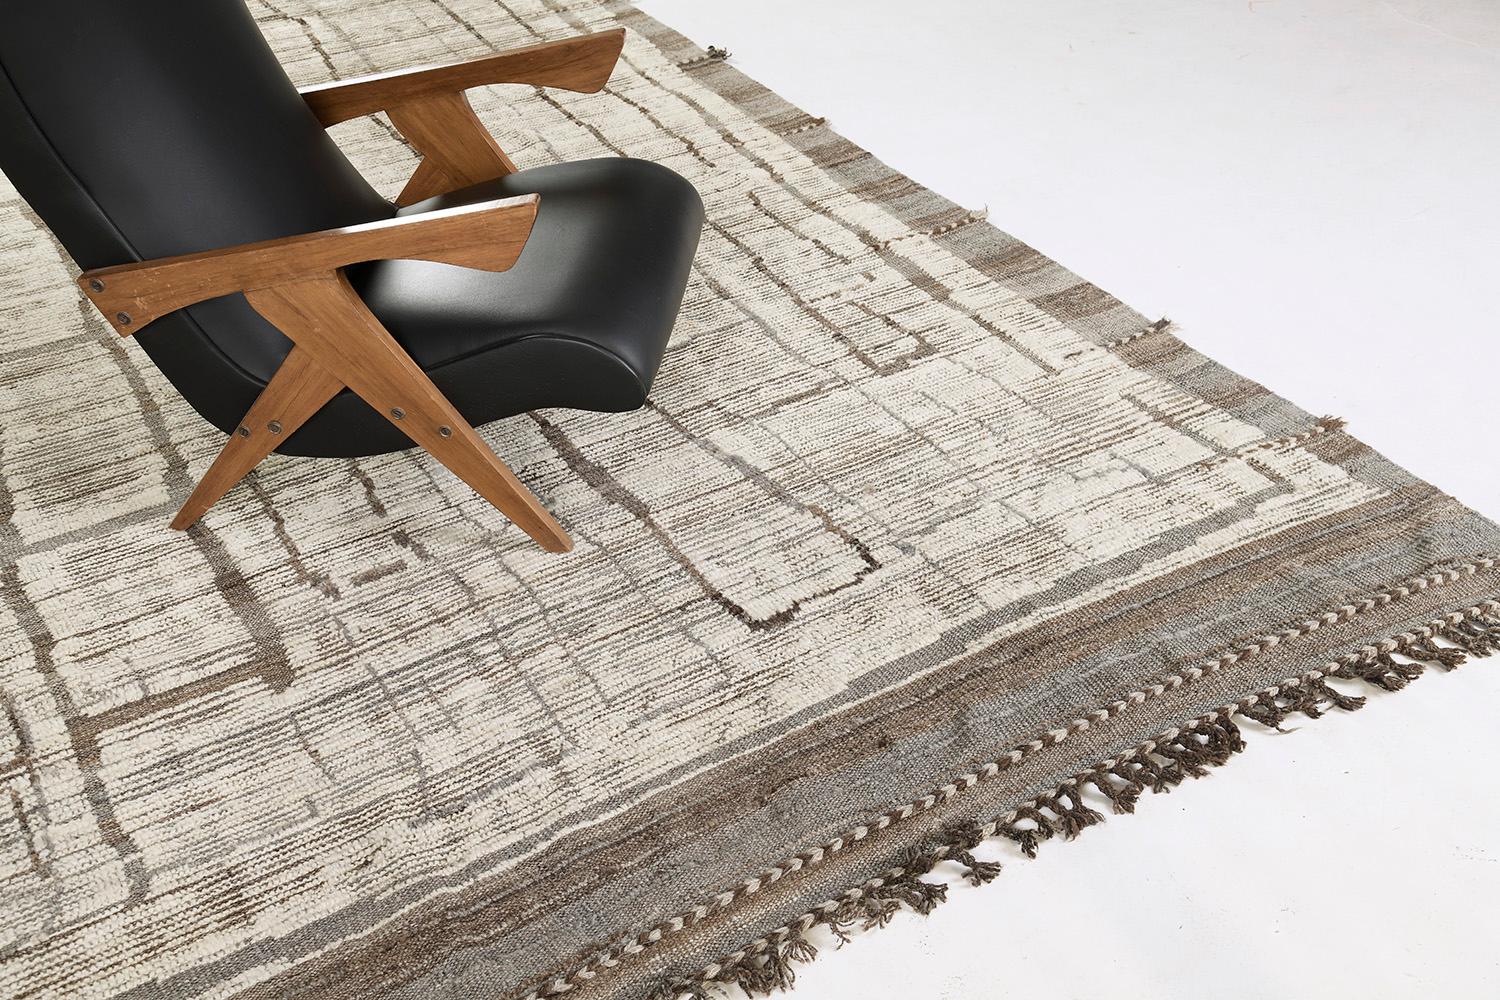 Tatbirt is an interplay between neutral tones and soothing shades into a modern-day interpretation of the Moroccan world. This rug's play of textures, linework, and simplicity is what makes the Atlas Collection so extraordinary and sought after.